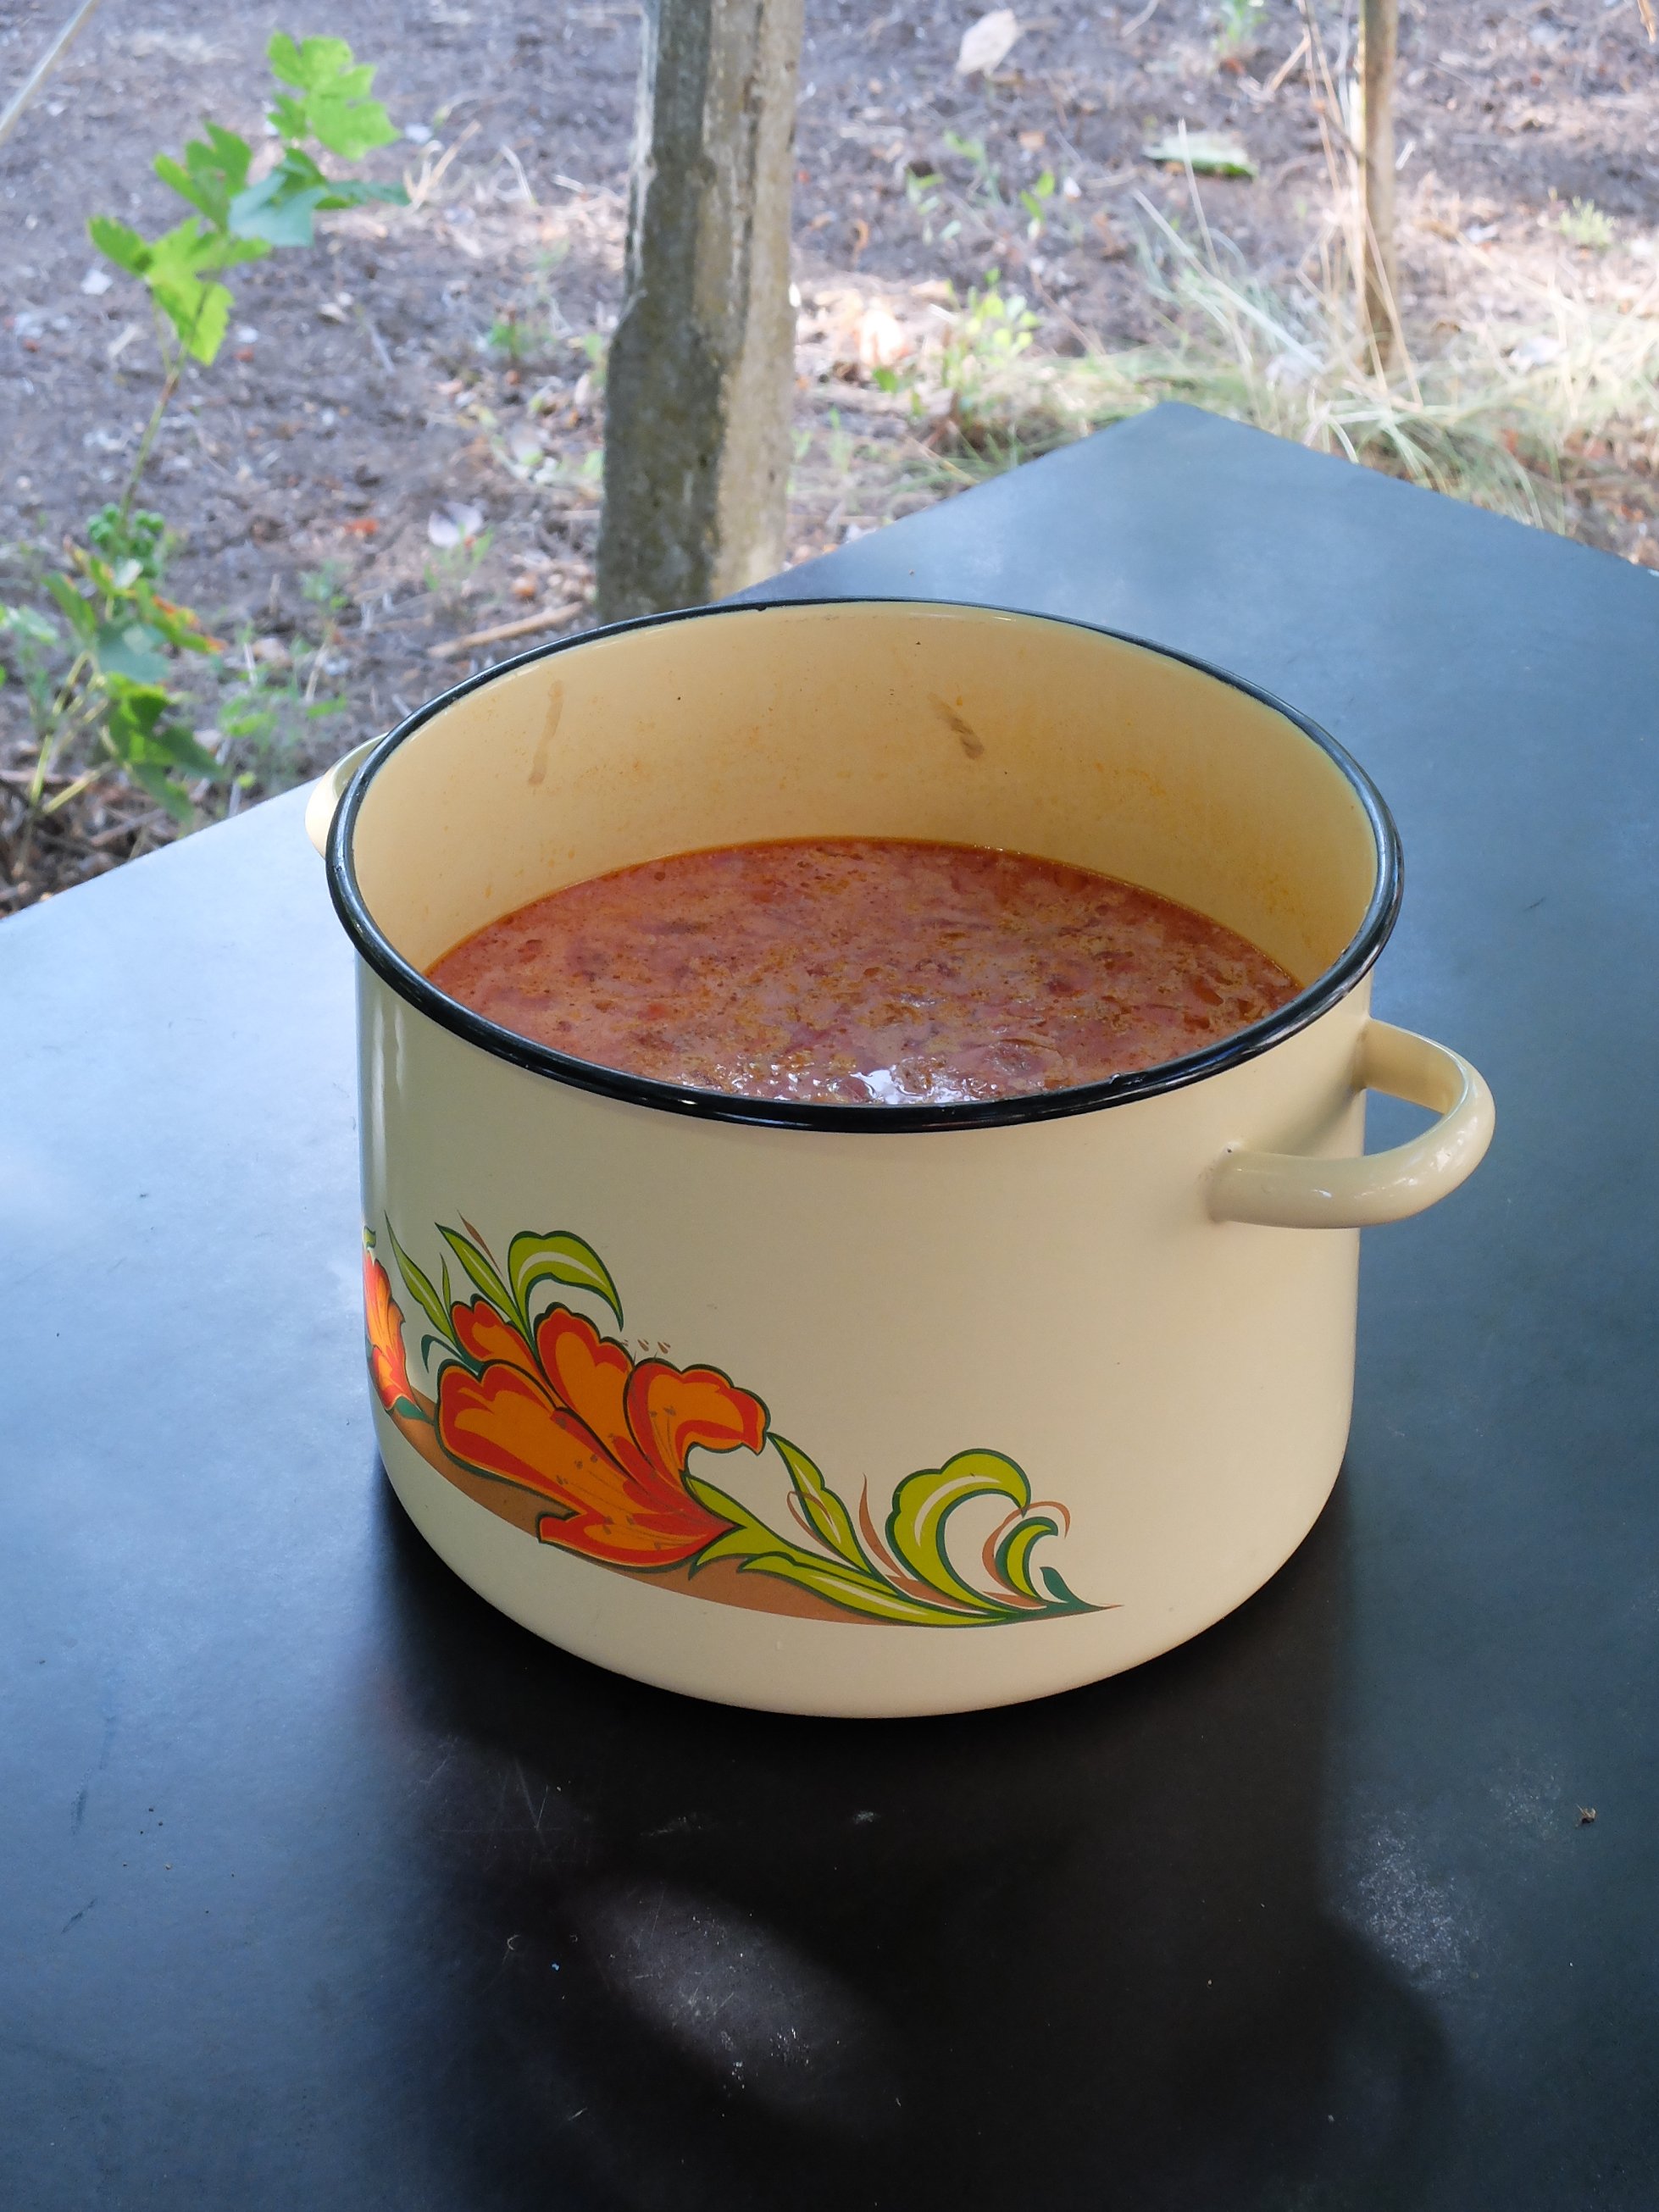   Mariana Lanari, Recipe: Borsht from the cookbook of granny Marianna, metal pot with orange flowers from baba Vasa's kitchen, cooked by Laurenz  